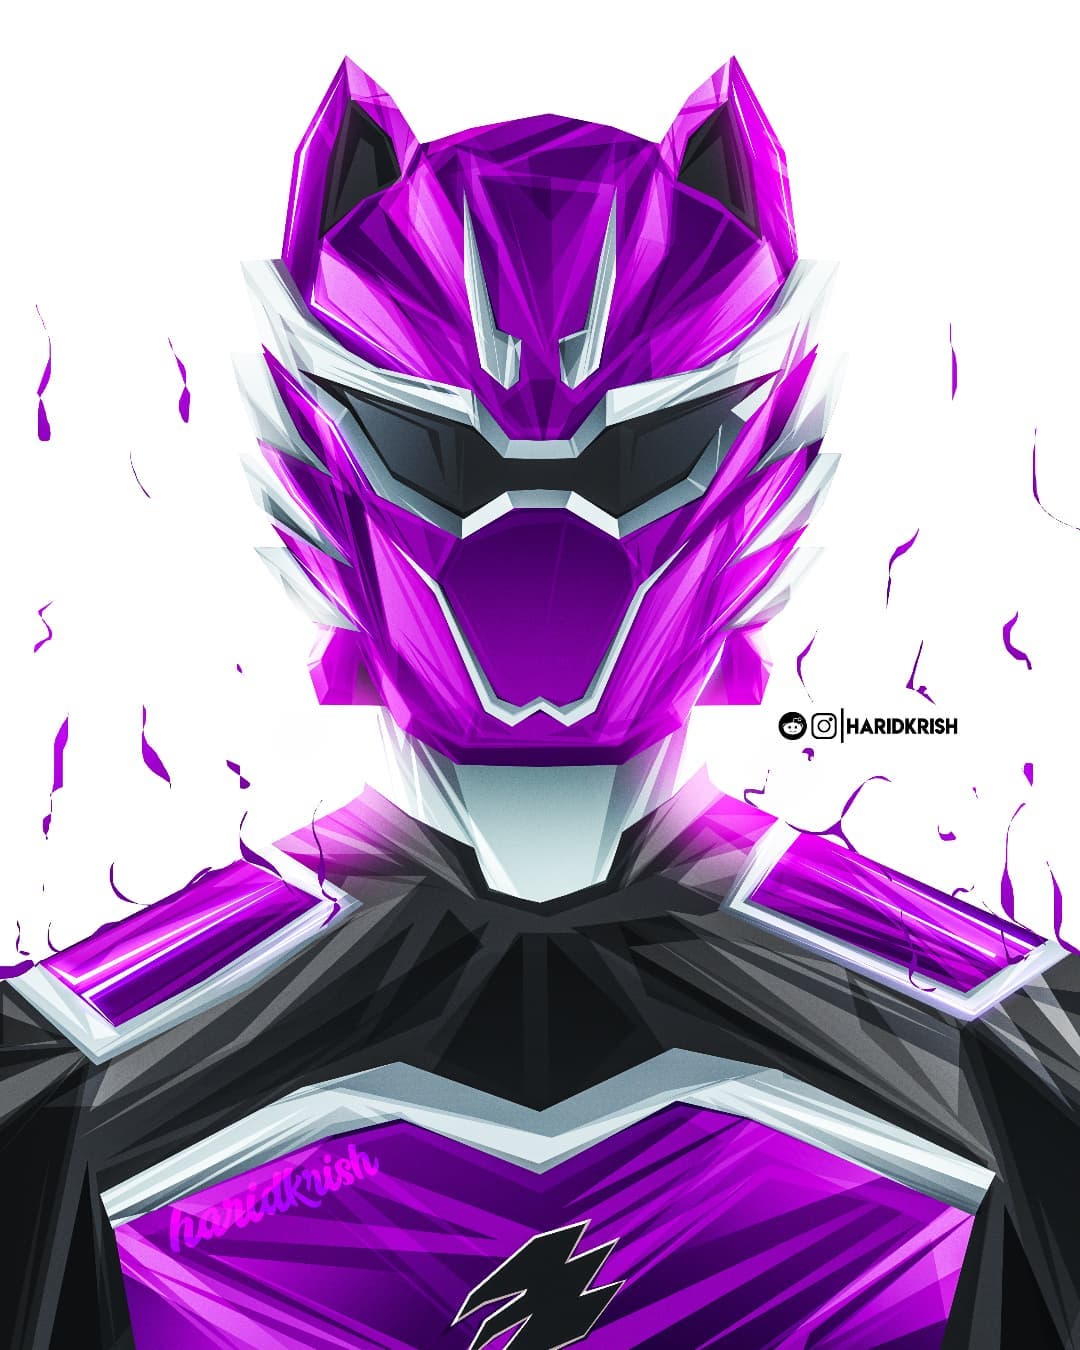 My third Power Rangers portrait artwork. This is Wolf ranger from Jungle Fury